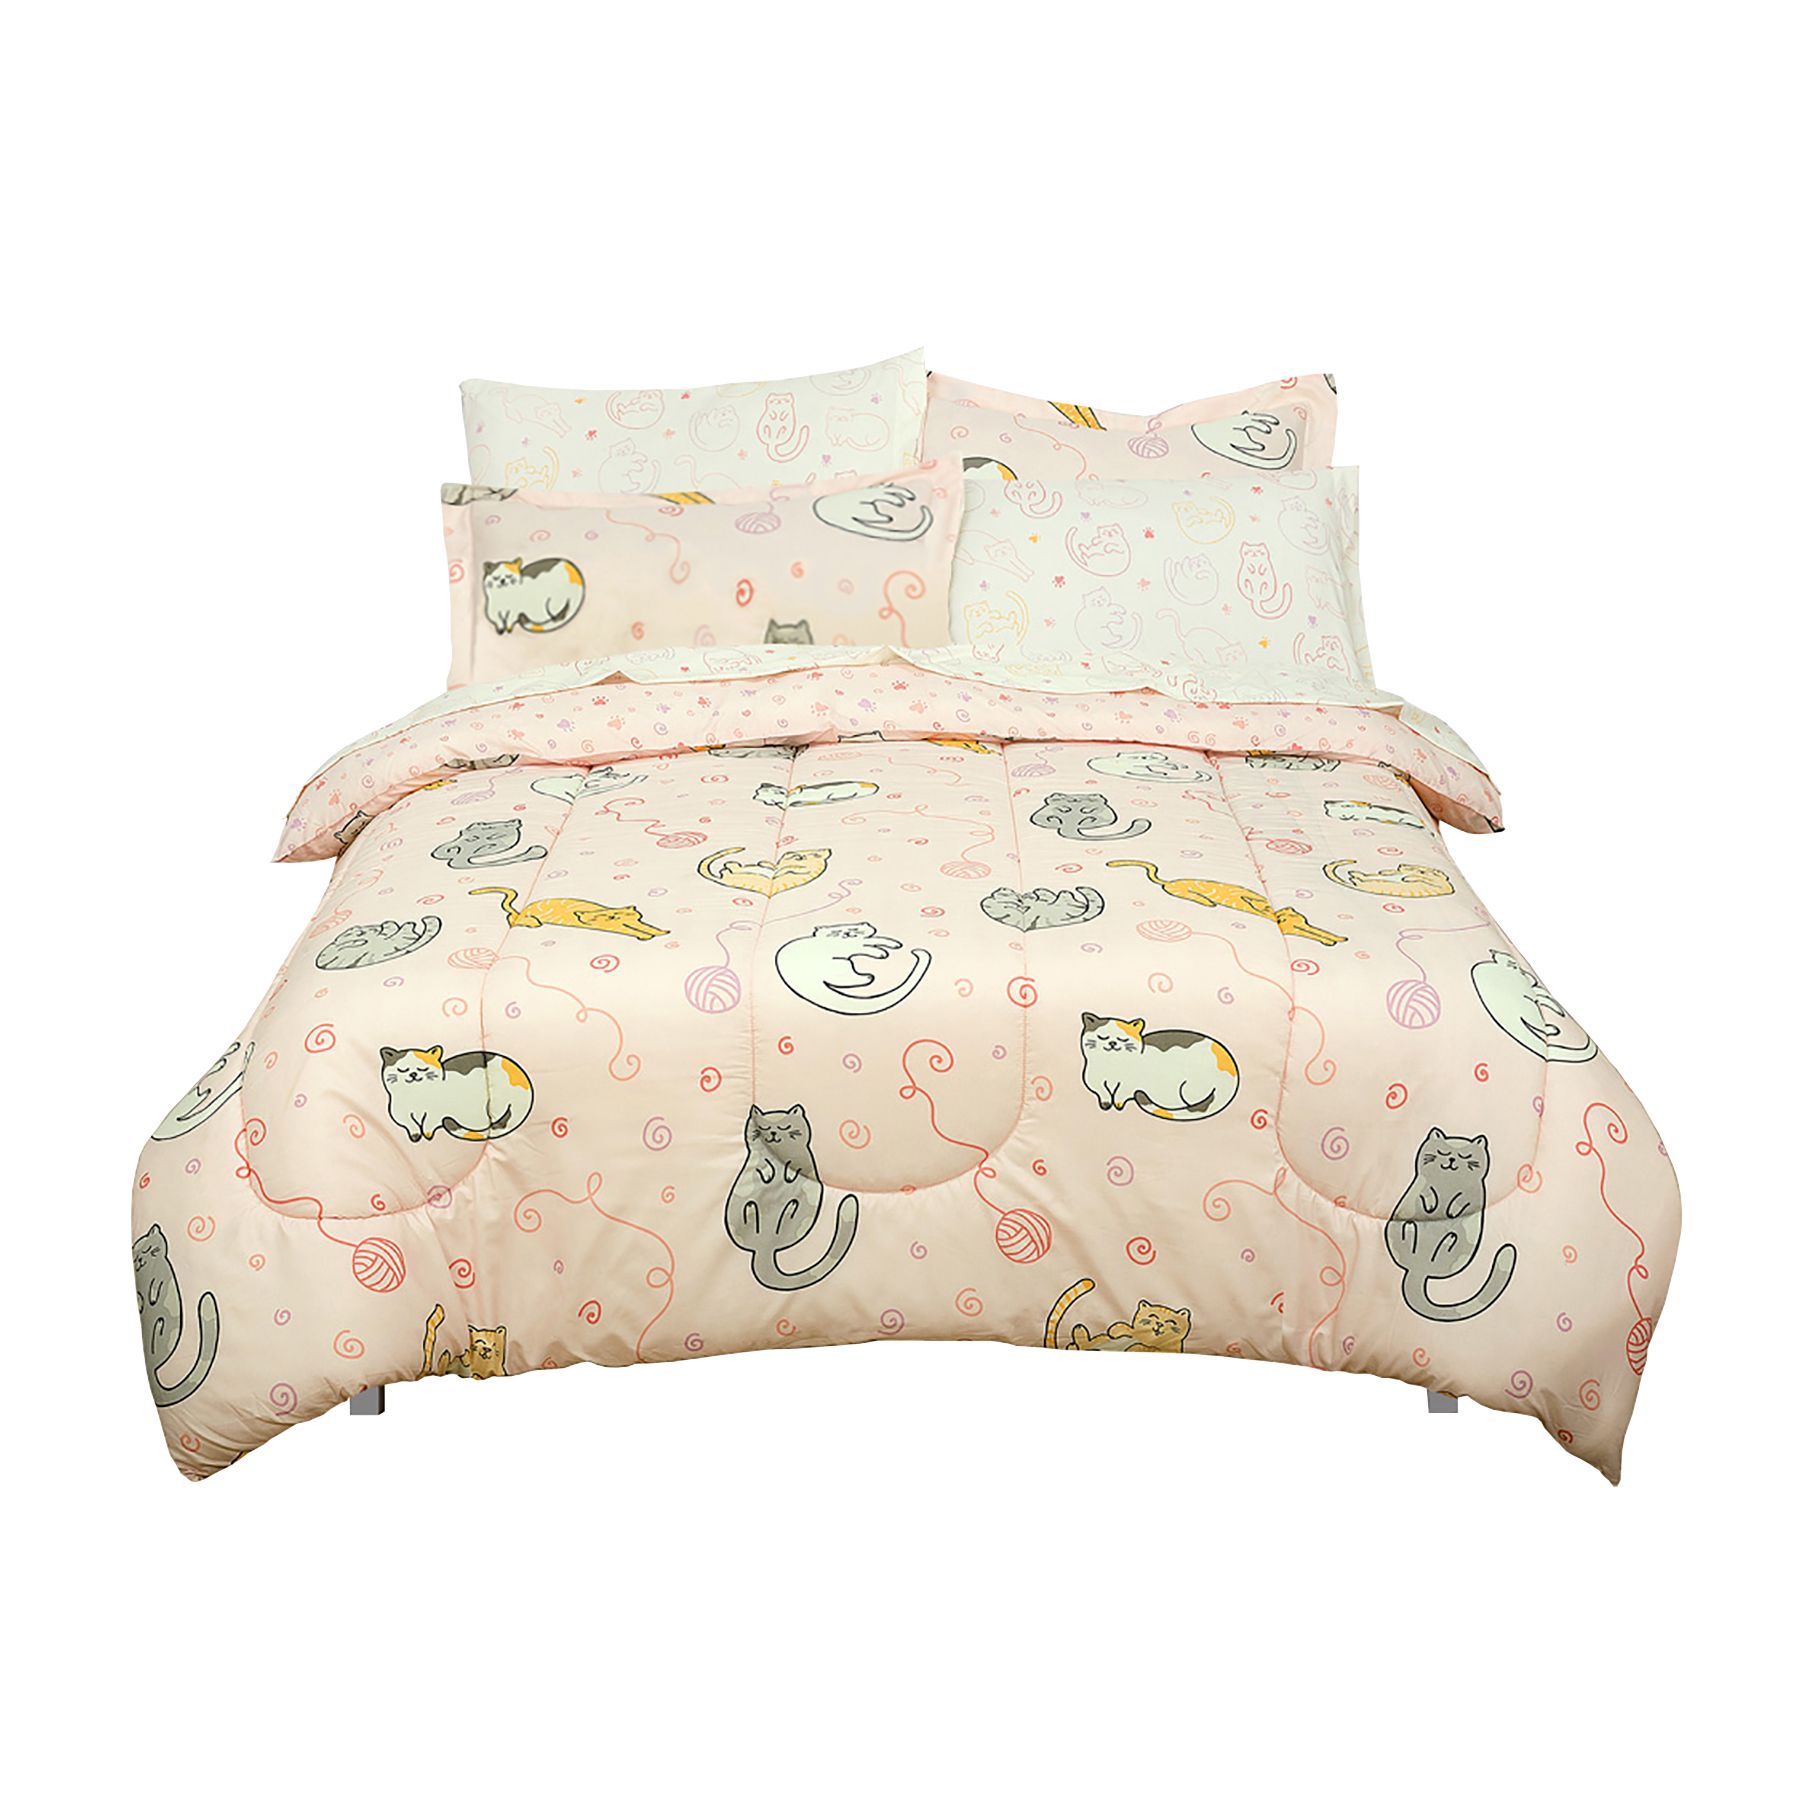 Kidz Mix Sleepy Cats Full Size Bed in a Bag with Reversible Comforter